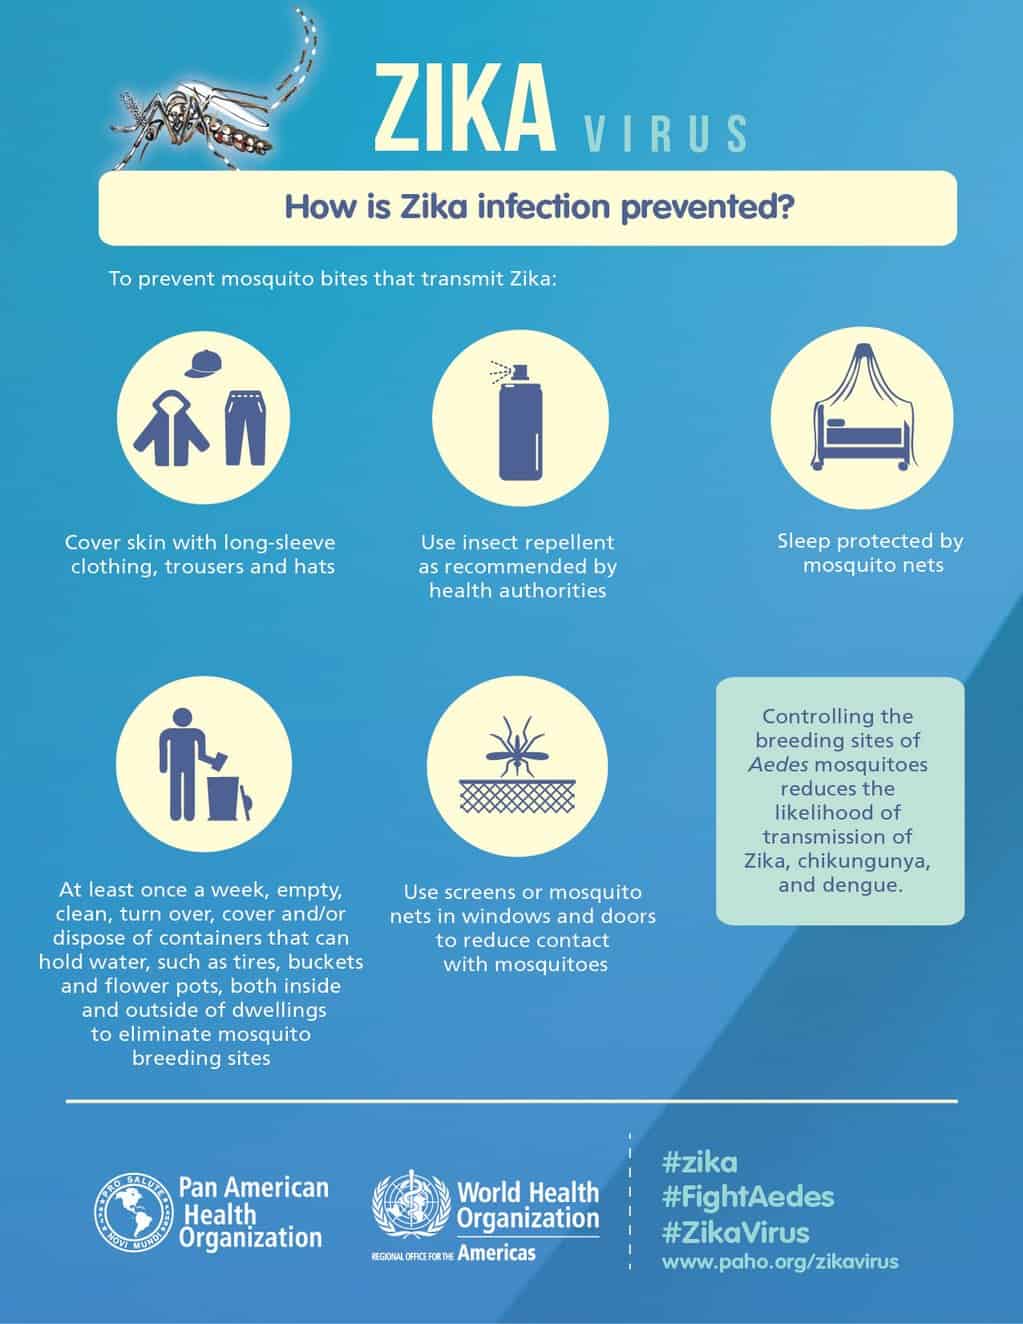 How is Zika infection prevented?